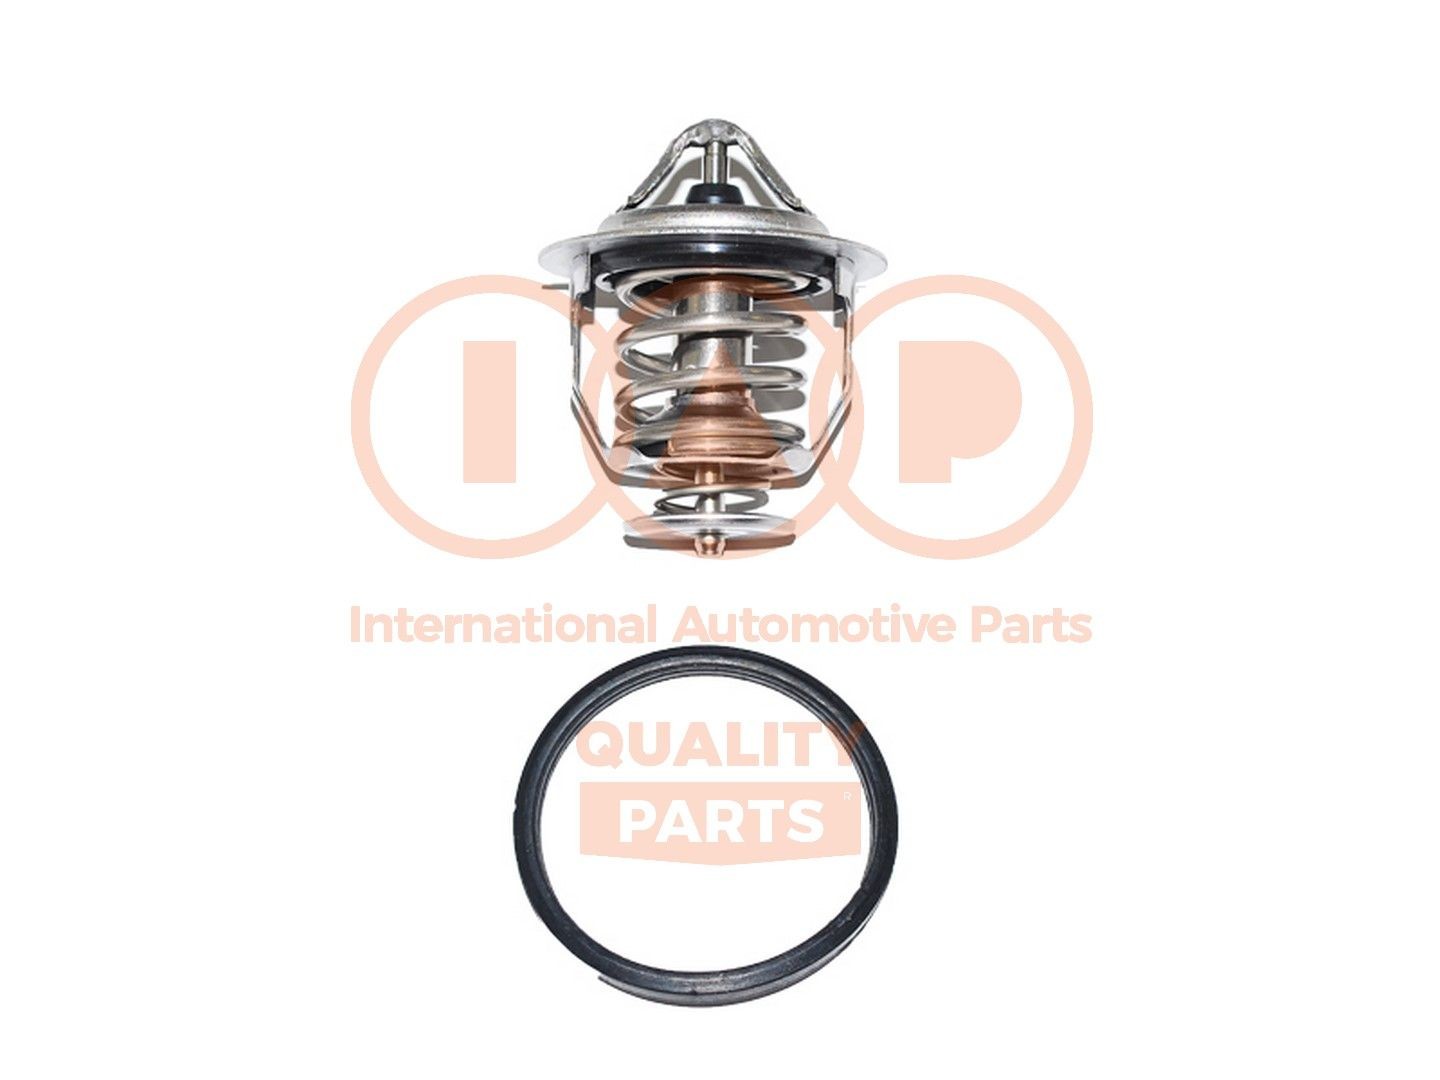 IAP QUALITY PARTS 155-17055 Engine thermostat 90916 03133